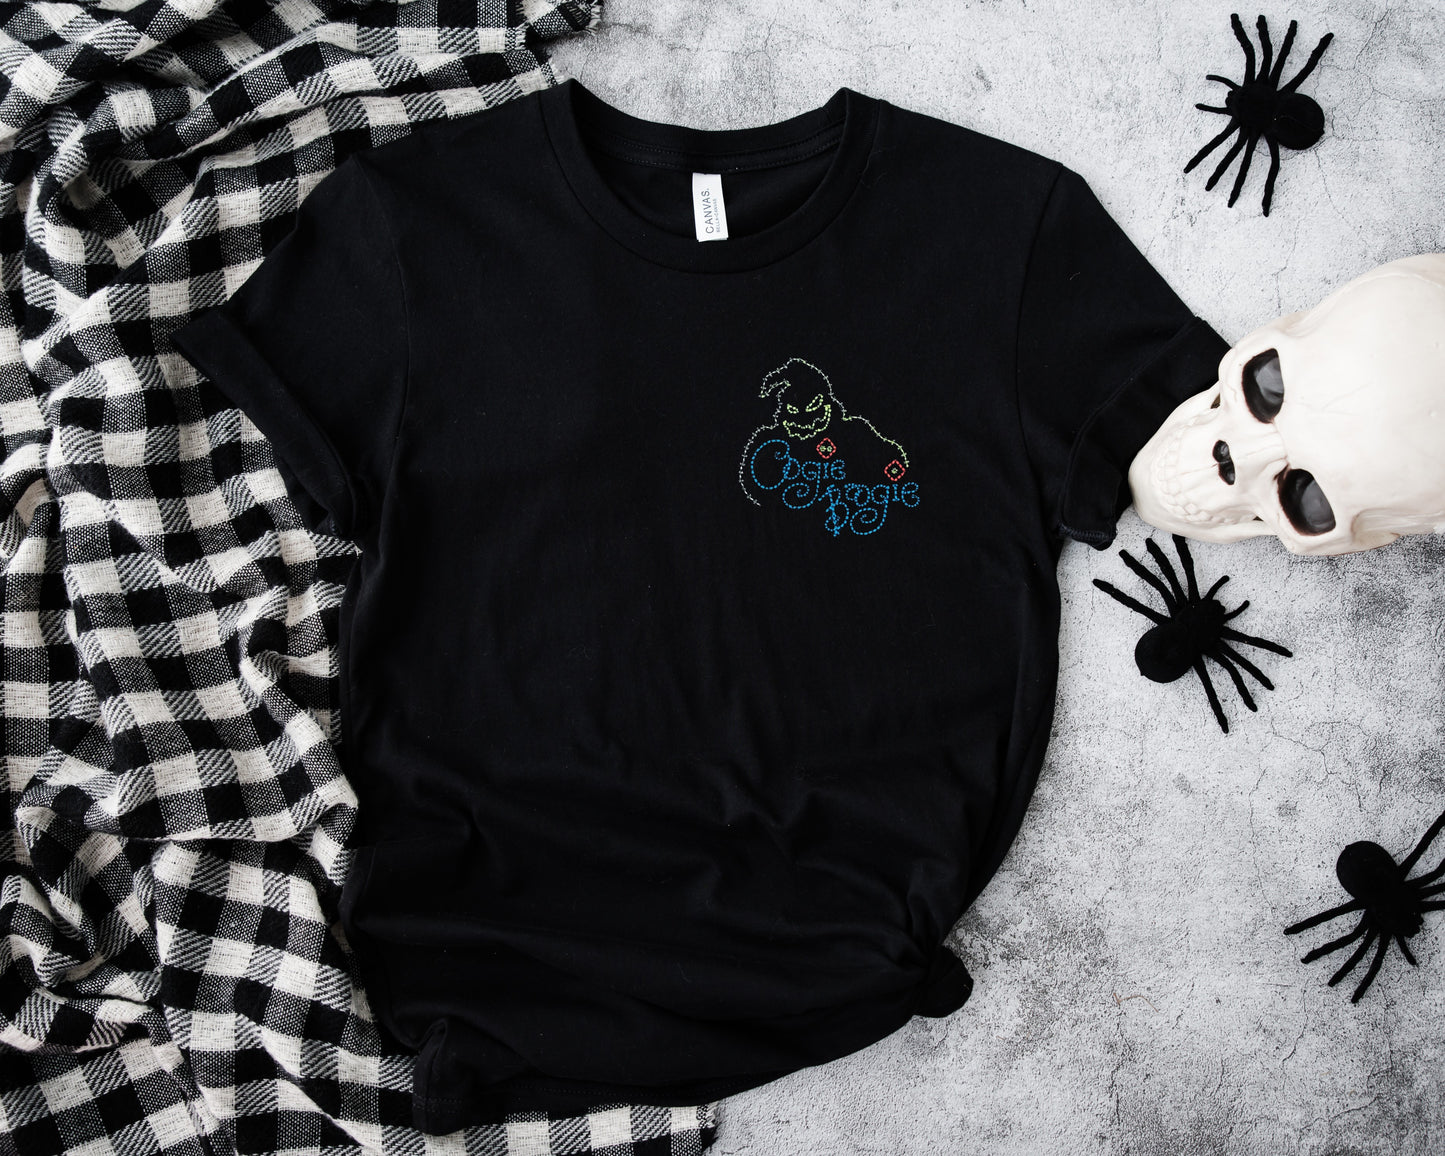 Oogie Boogie Autograph Black Embroidered Tee